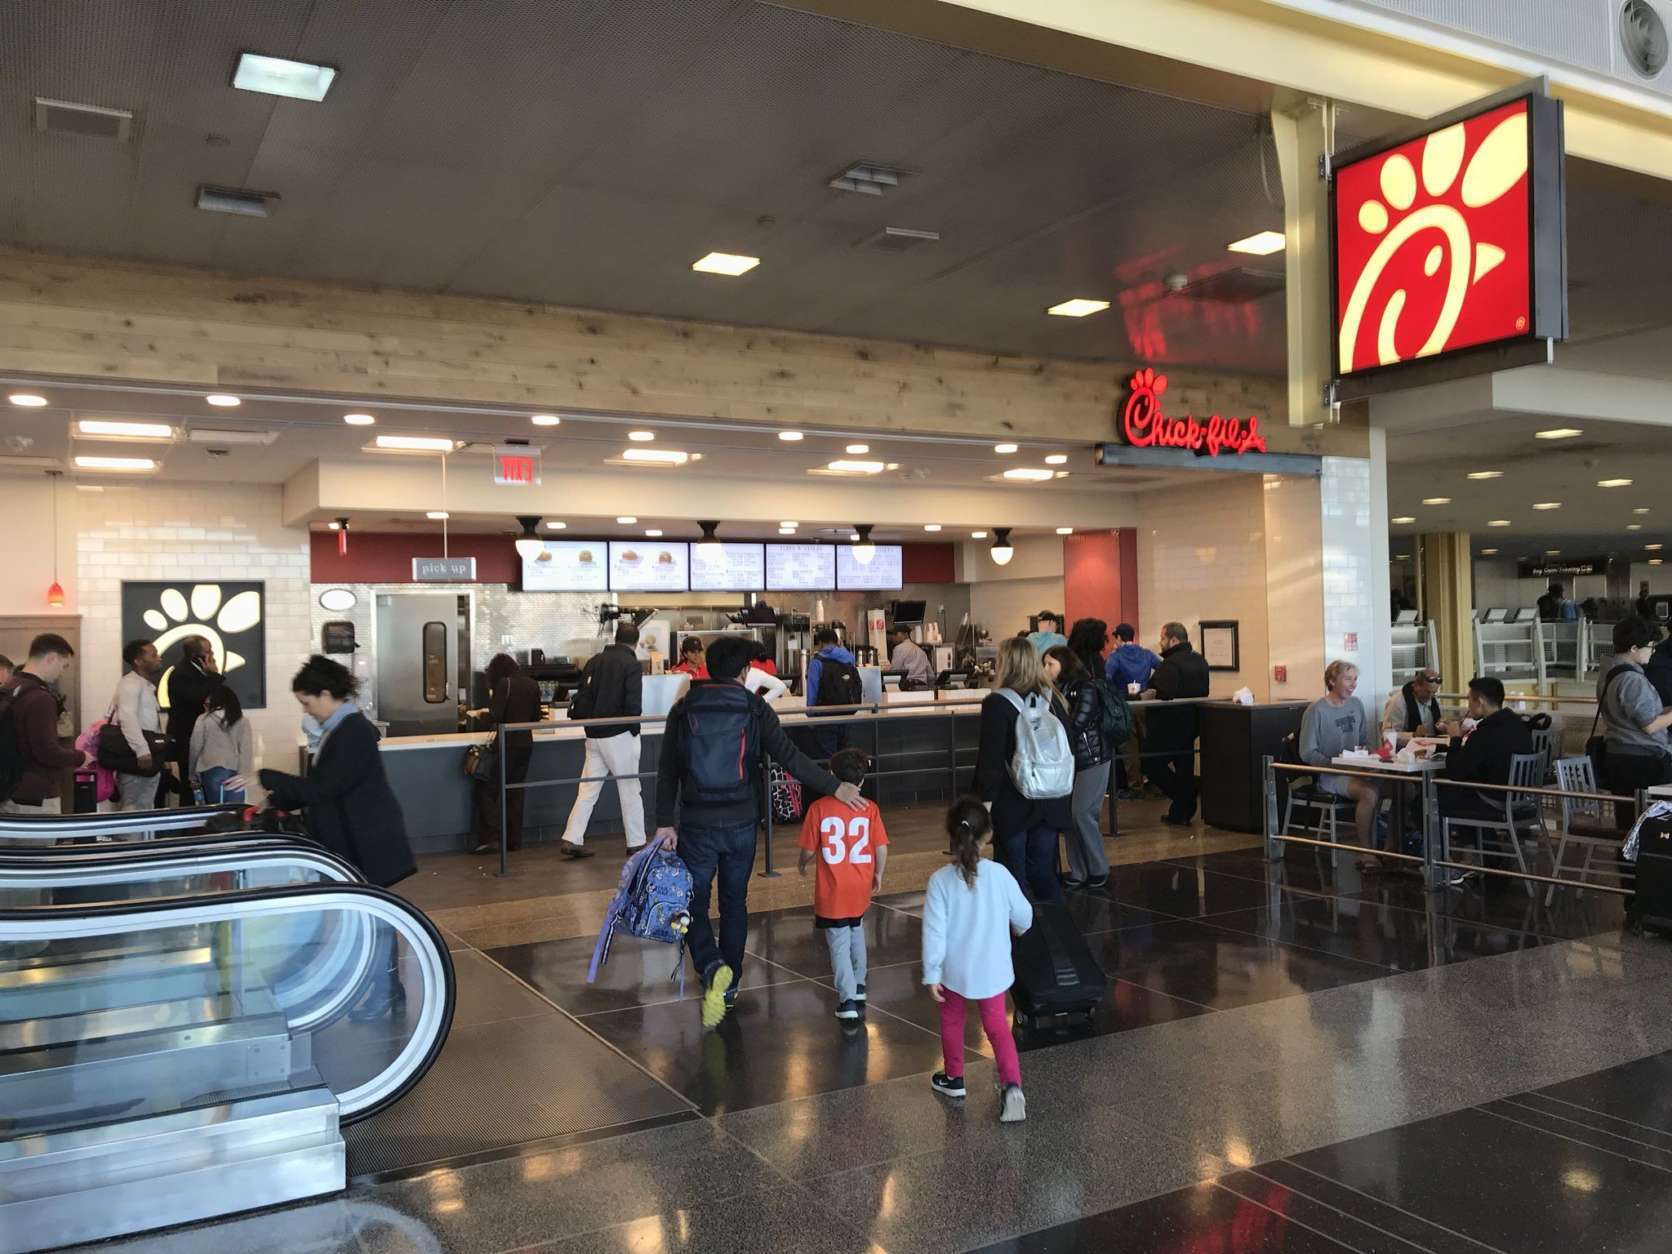 Chick-fil-A is one of the new food offerings at Reagan National Airport. (WTOP/Michelle Basch)